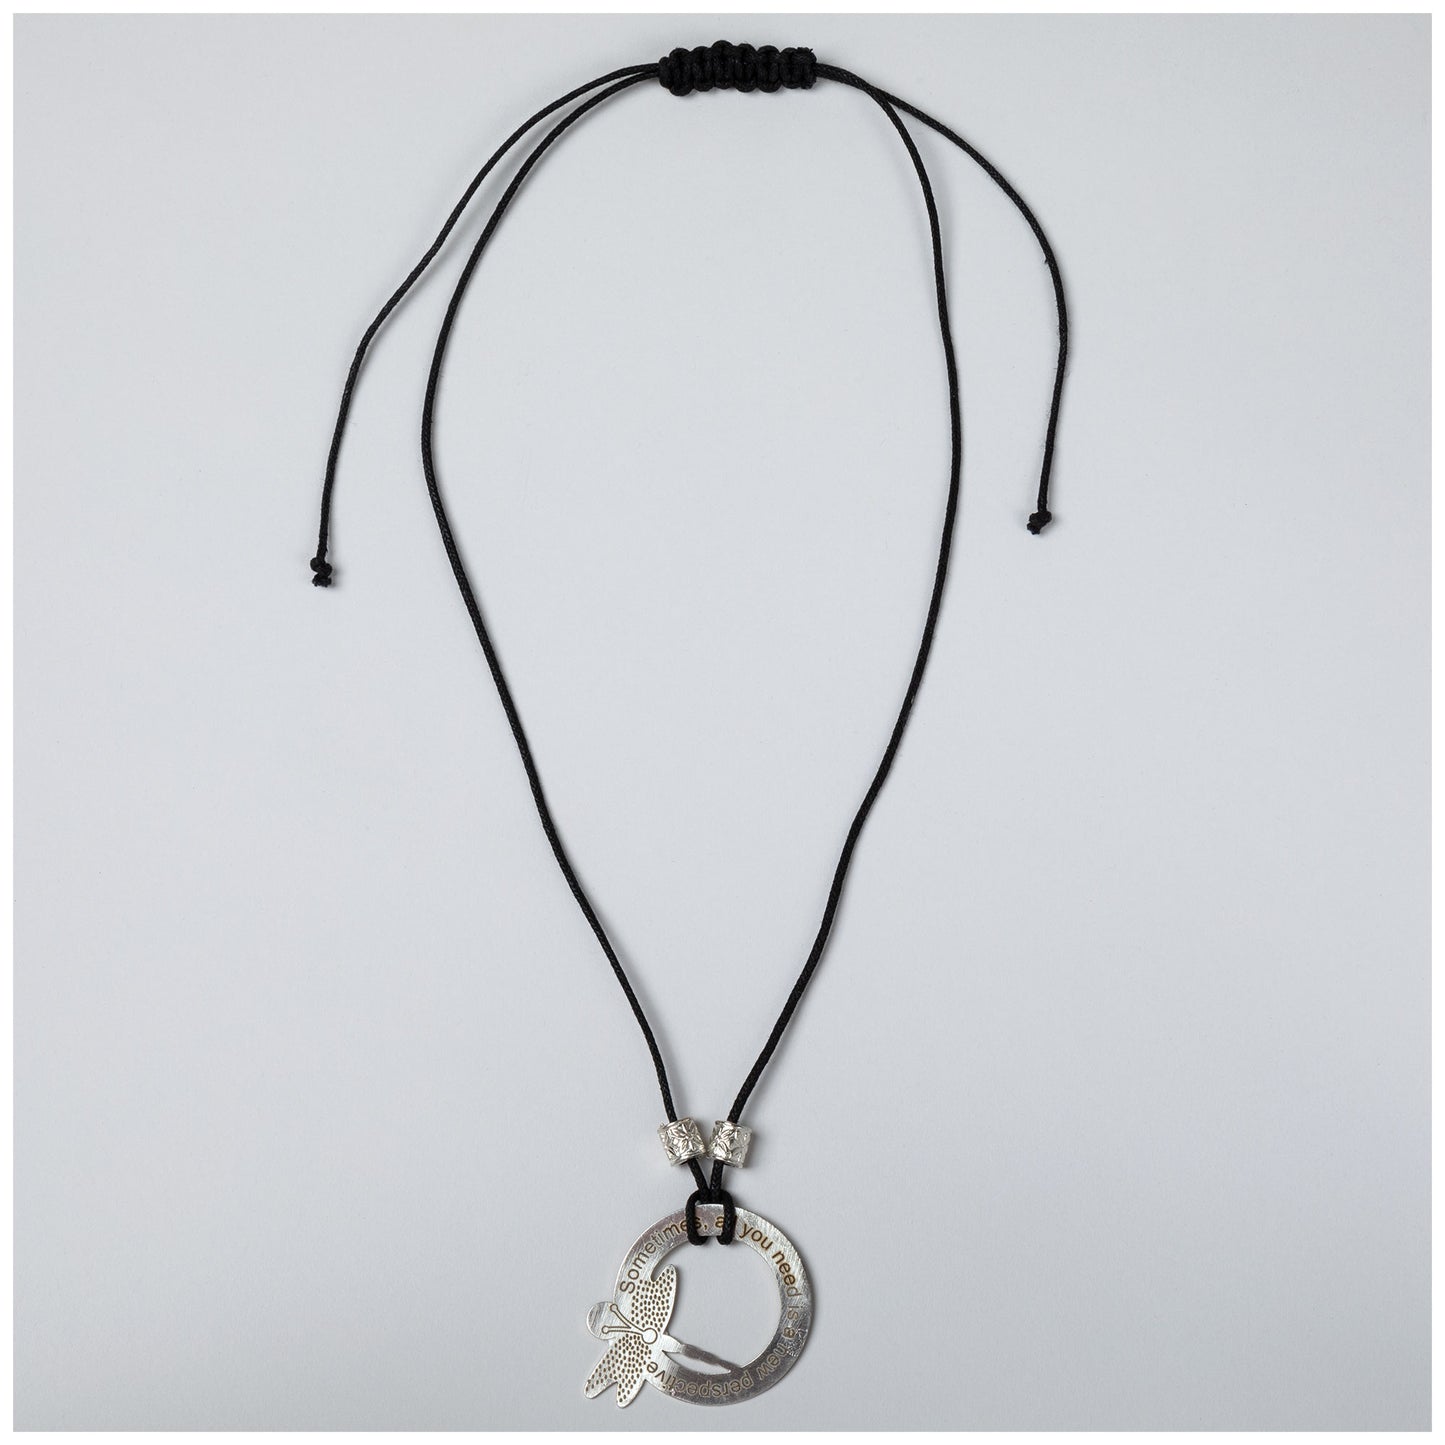 New Perspective Eyeglass Necklace Holder